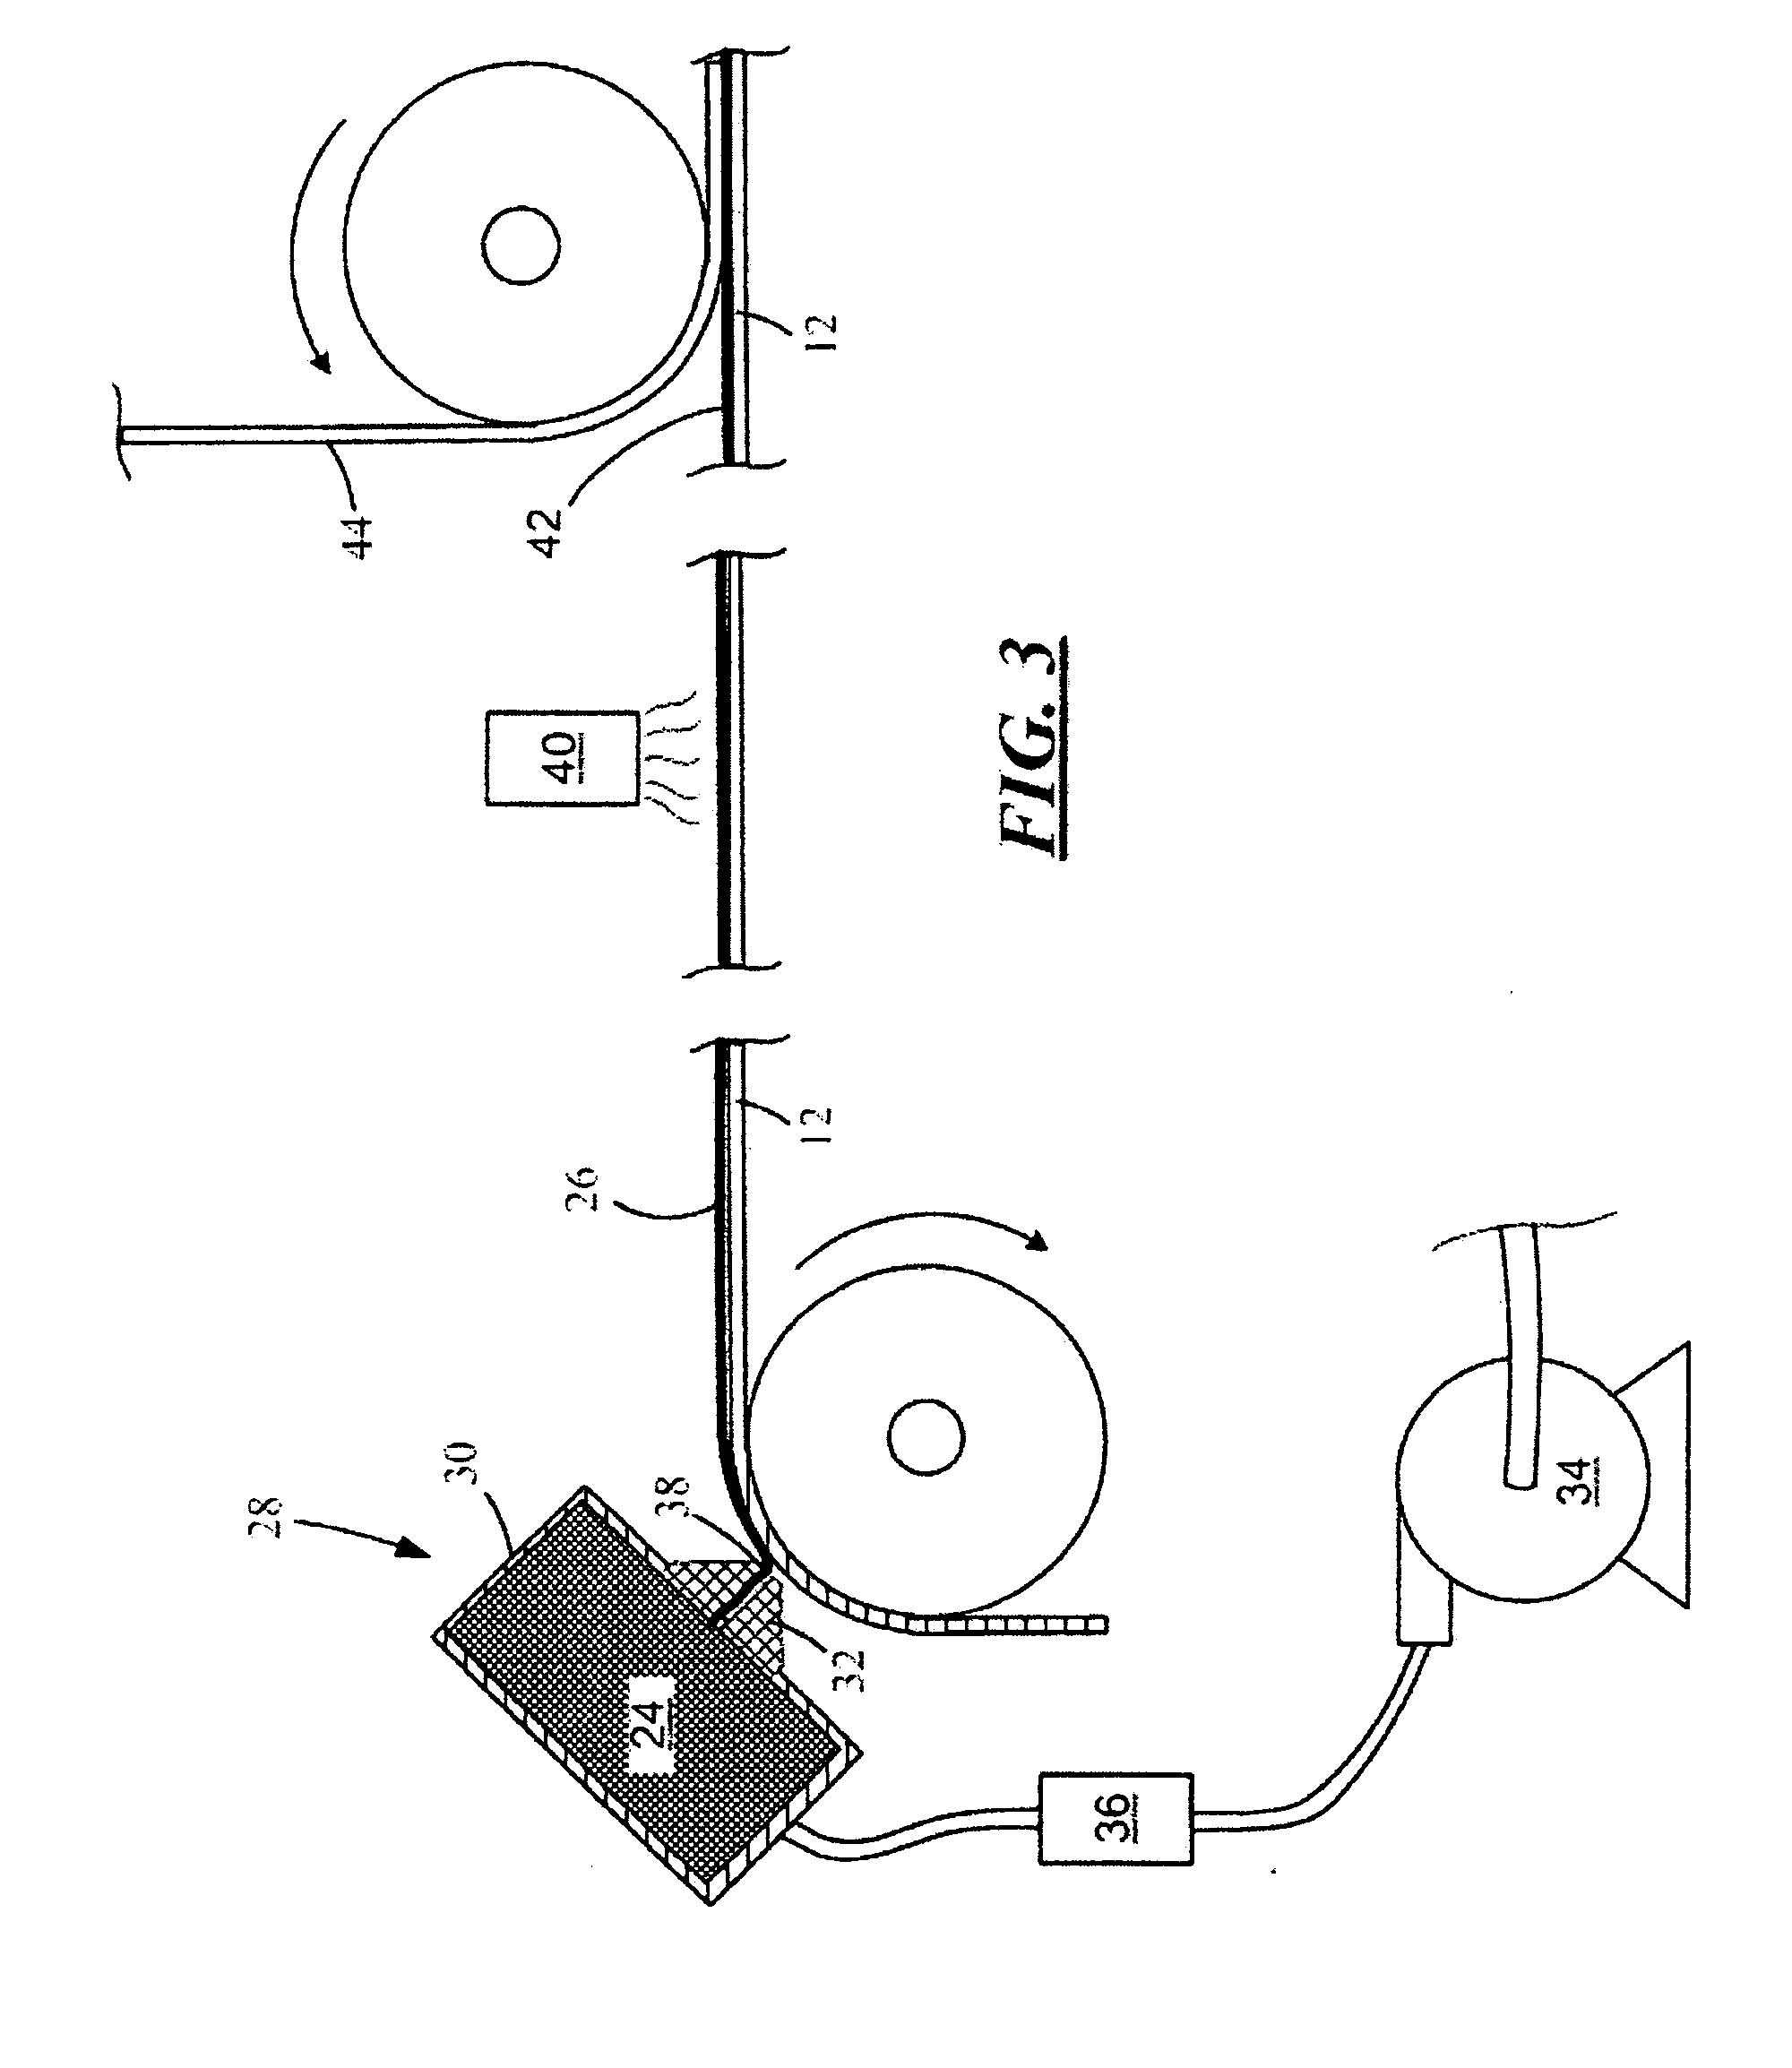 Dry film protoresist for a micro-fluid ejection head and method therefor